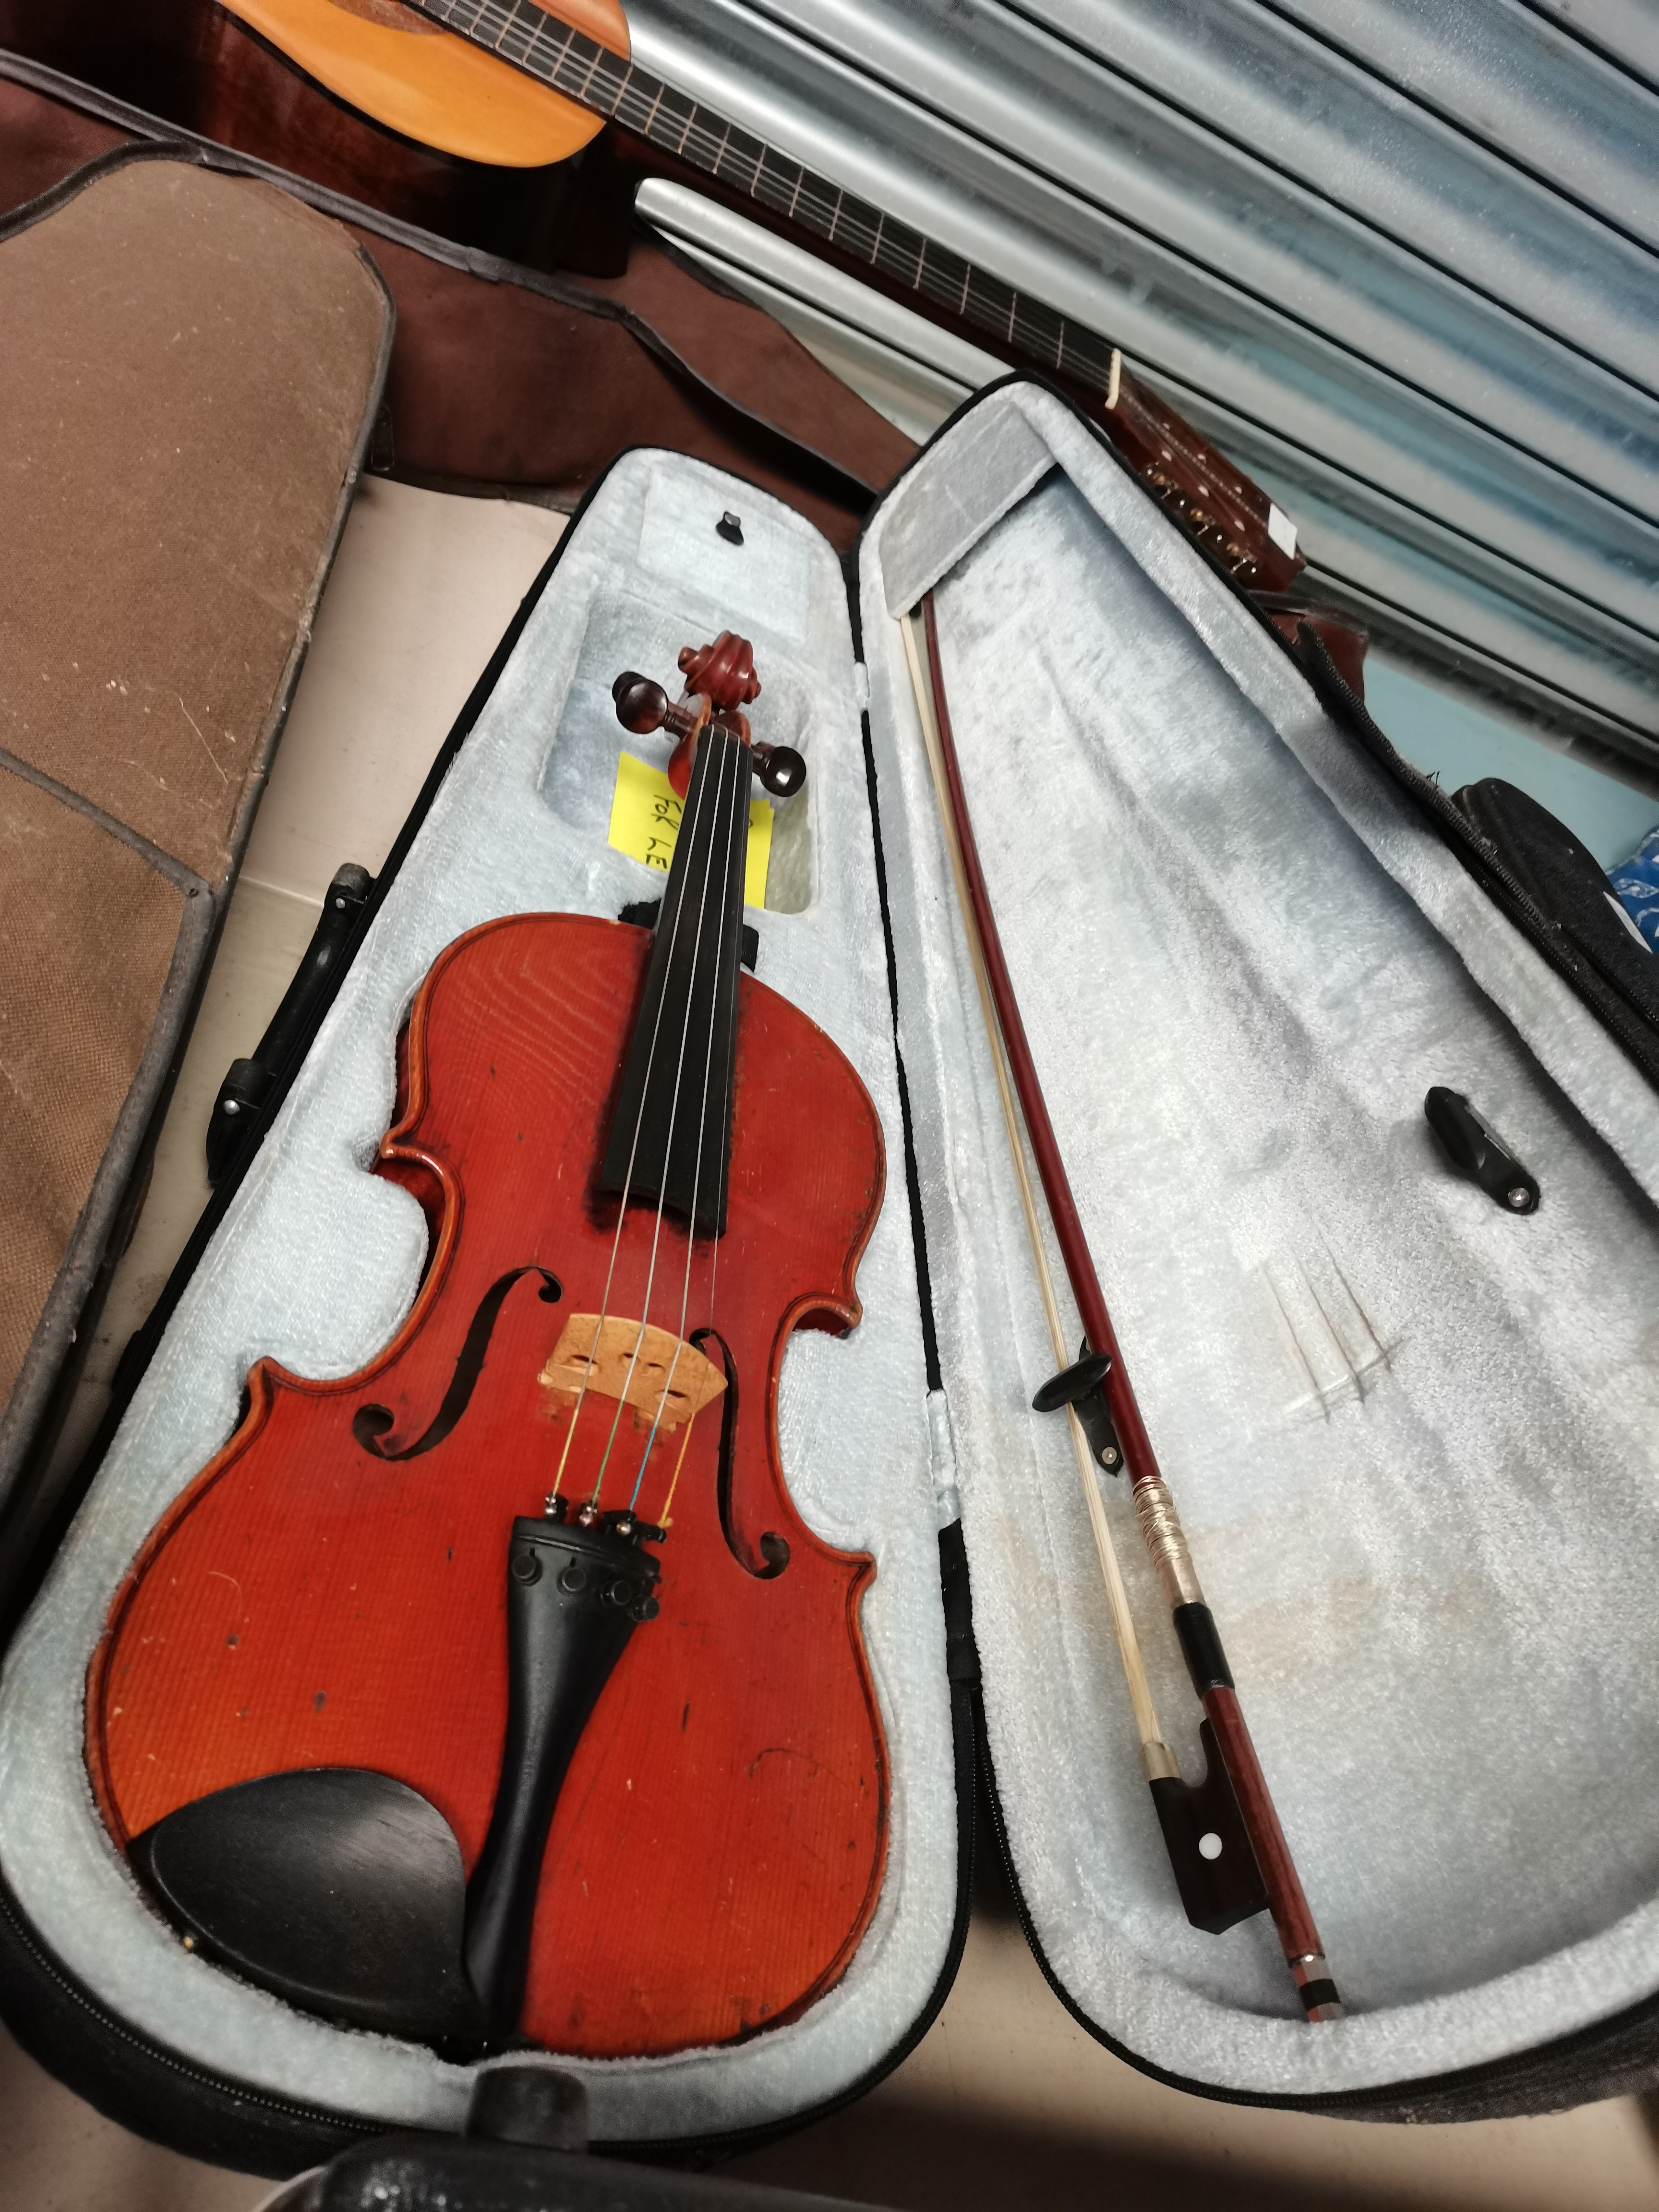 Violin and Bow In Case - Image 3 of 10